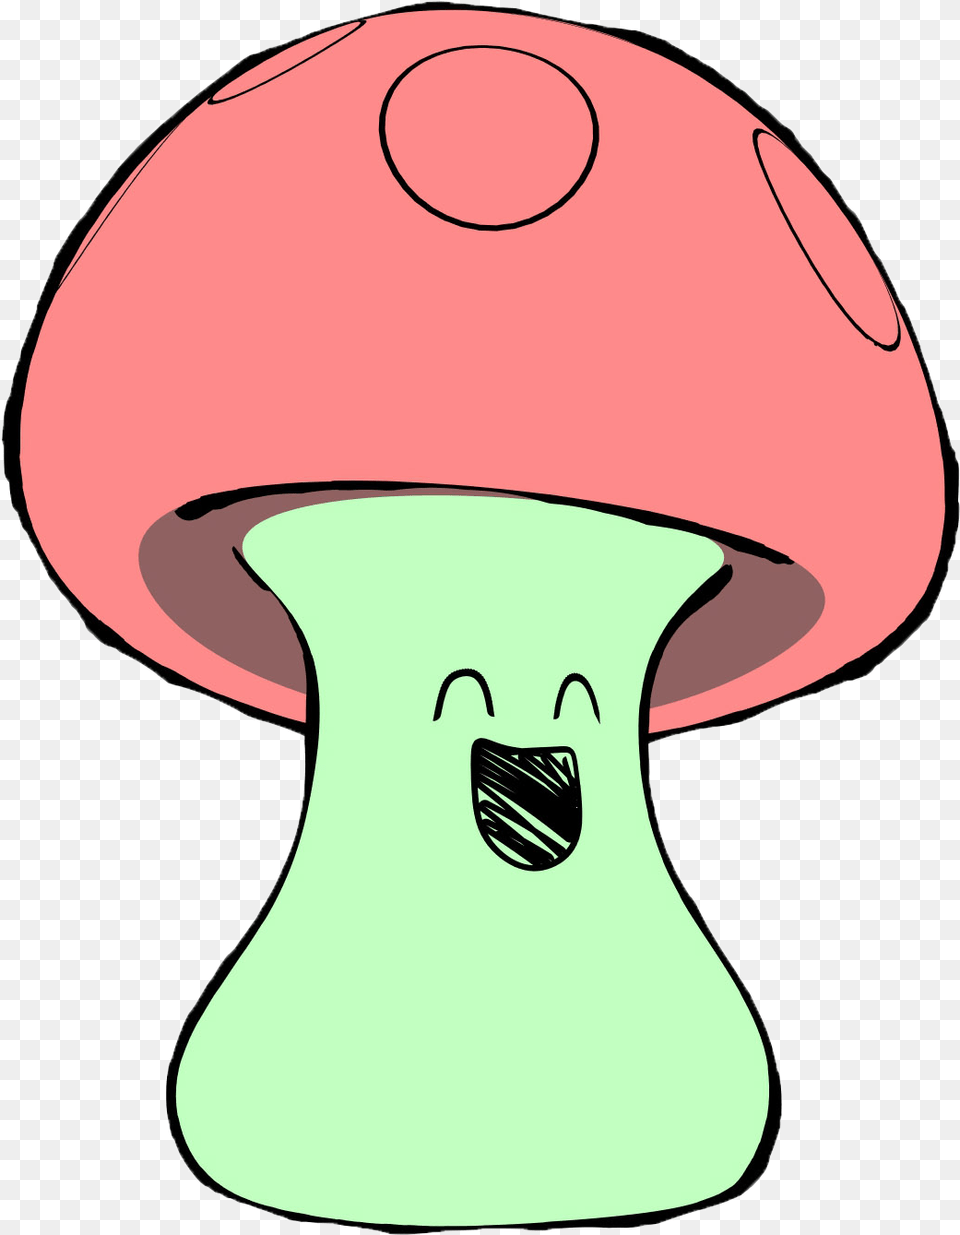 The Cartoon Mushroom Rendered Here Makes Use Of Intersection, Helmet, Adult, Female, Person Png Image